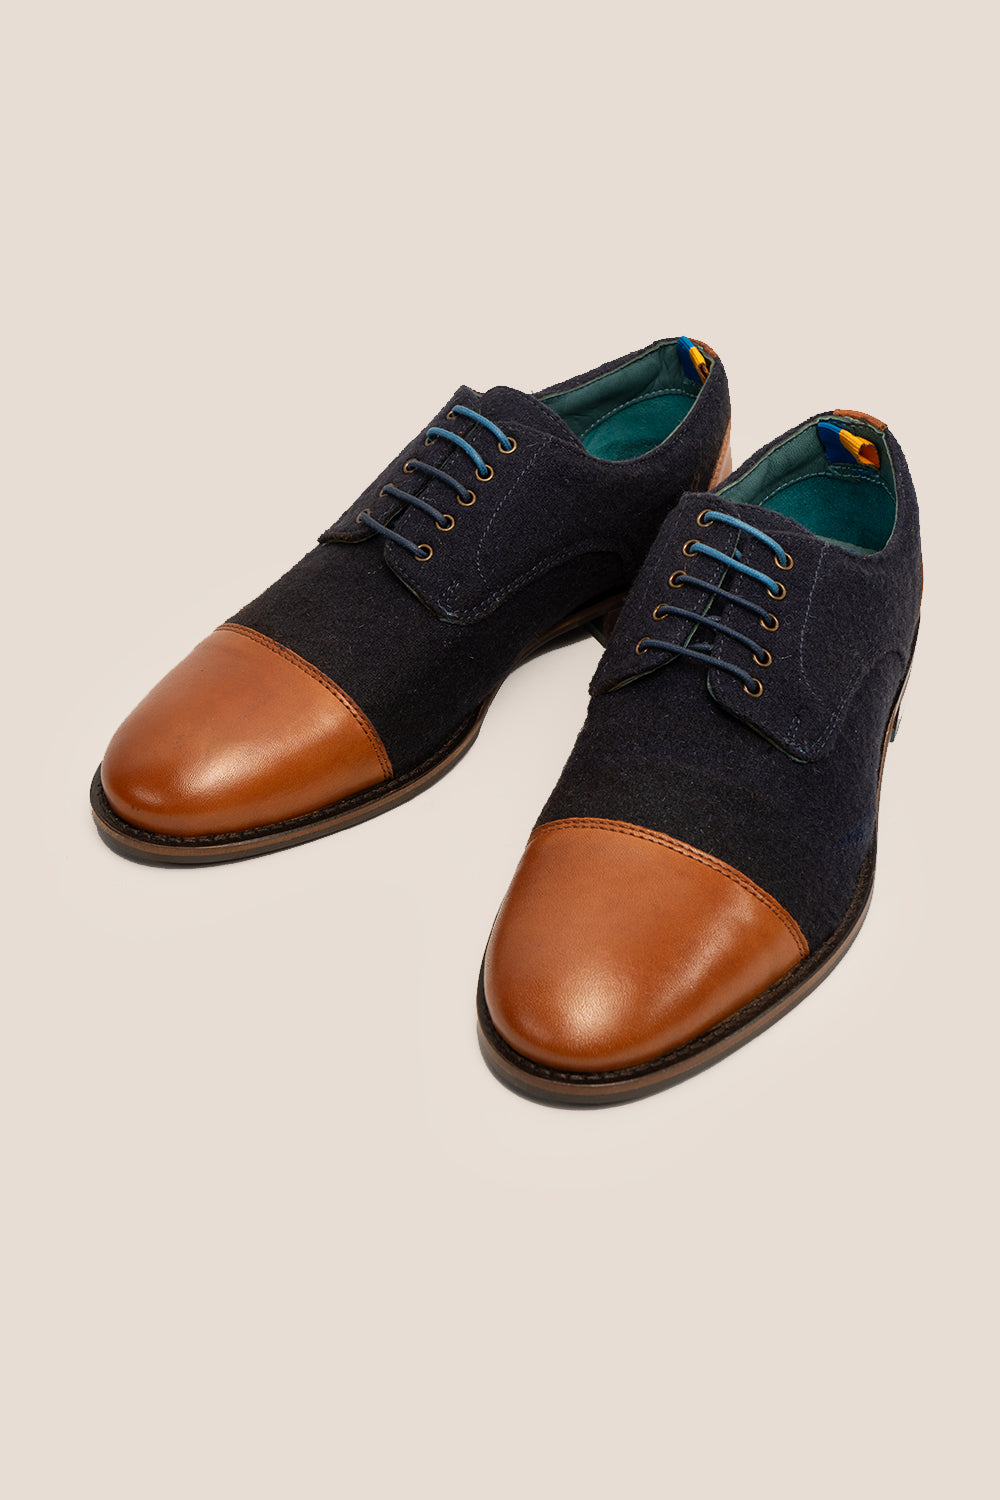 Thomas cognac navy leather and felt mens shoes Oswin Hyde